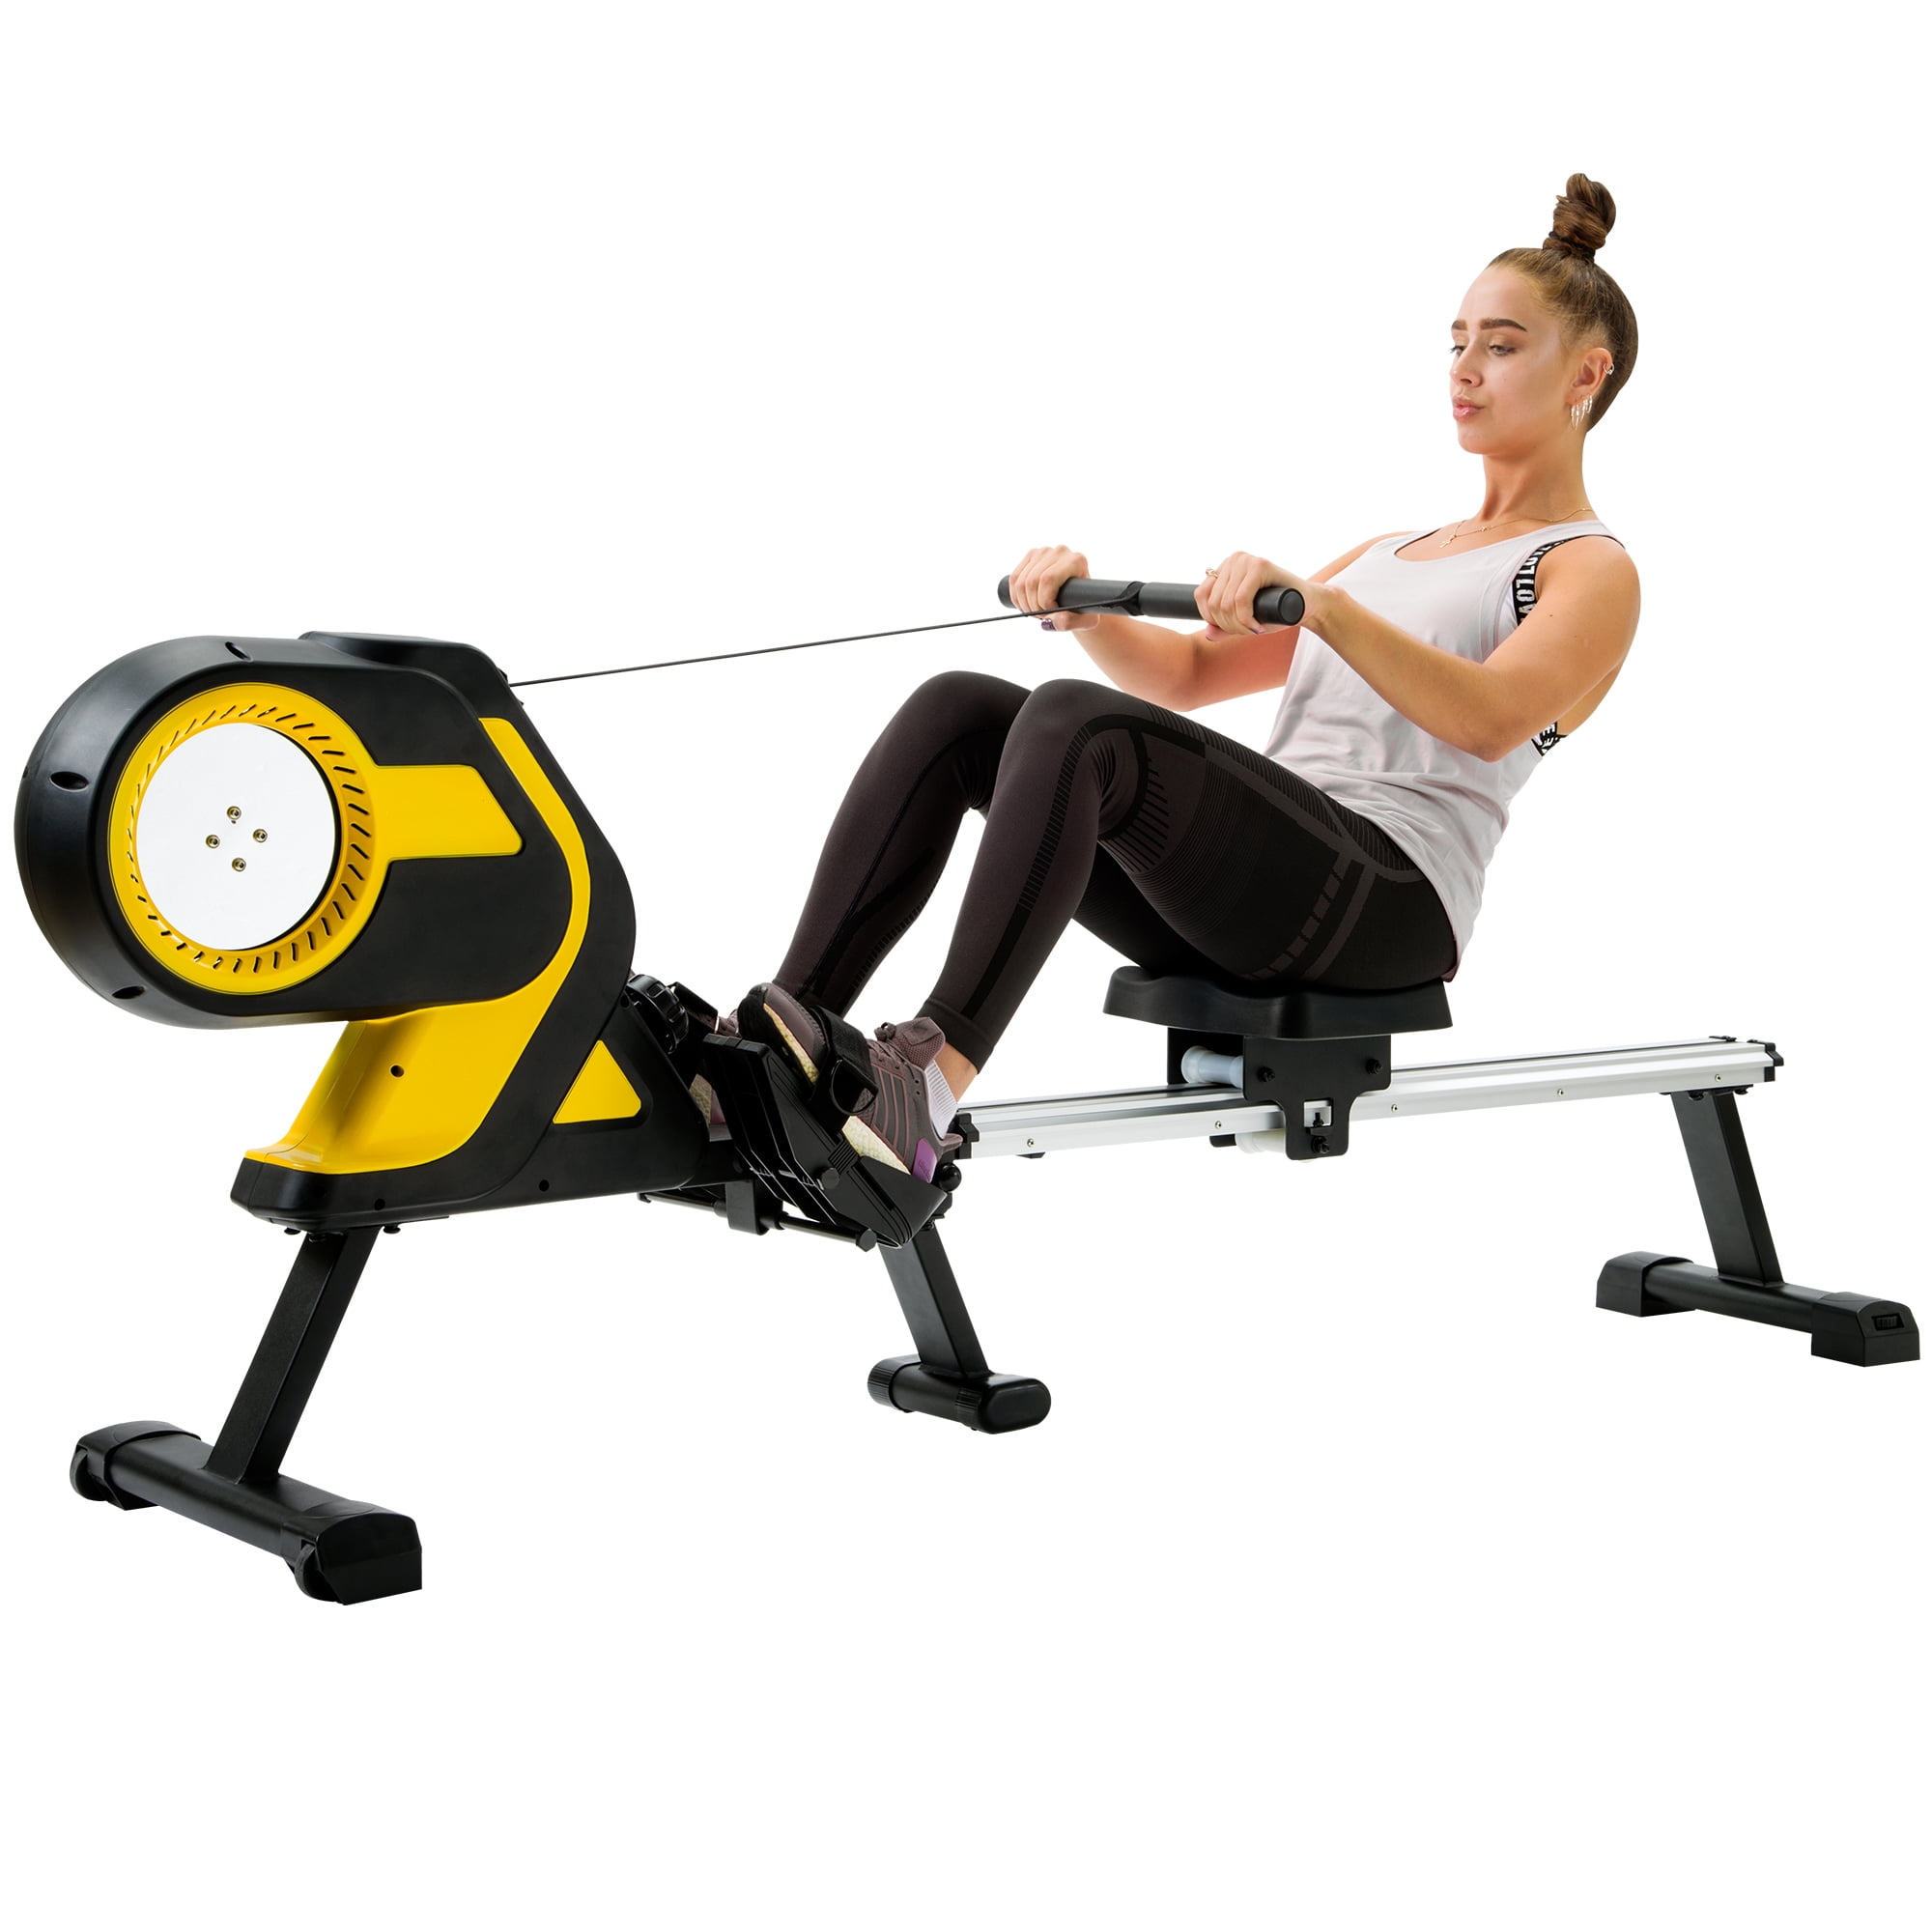 Details about   Metal Water Rowing Machine Rower Cardio Fitness Exercise Home Gym w/ LCD Monitor 